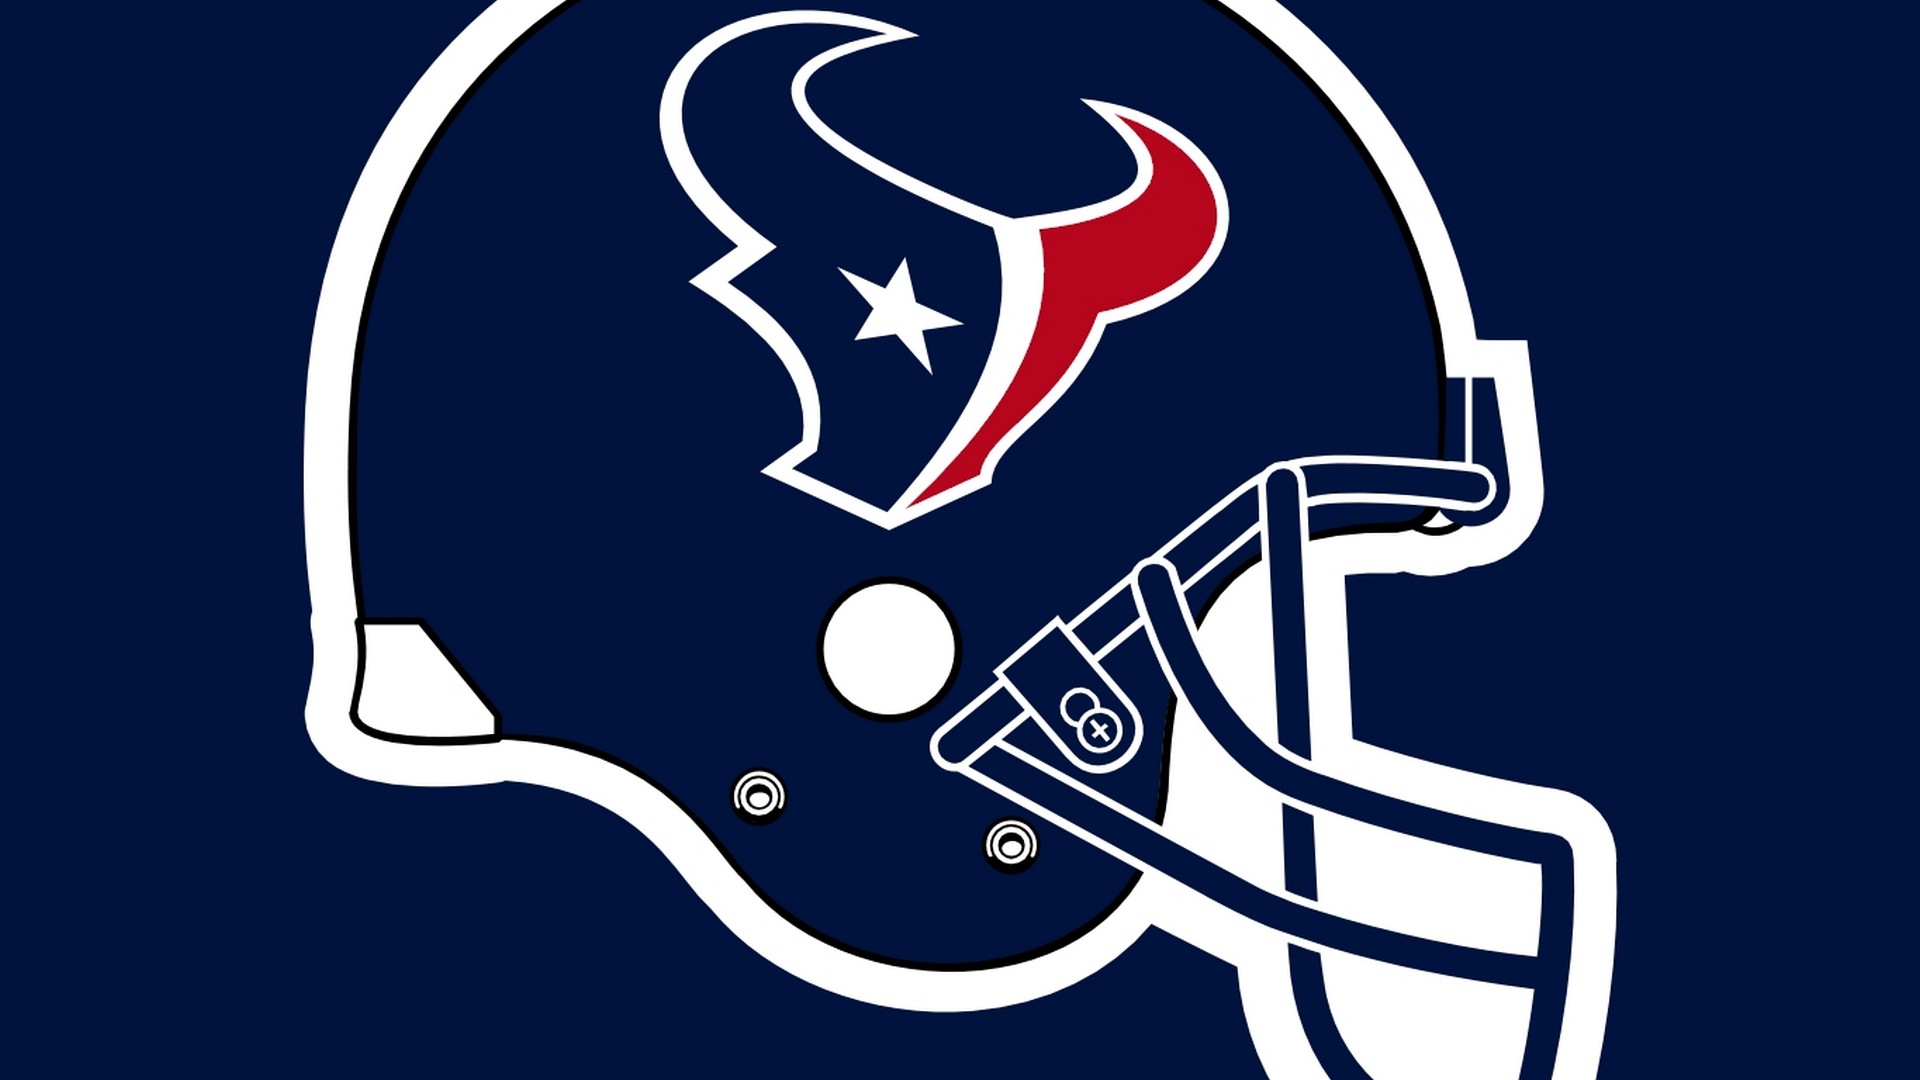 Best Houston Texans Wallpaper in HD With high-resolution 1920X1080 pixel. Download and set as wallpaper for Desktop Computer, Apple iPhone X, XS Max, XR, 8, 7, 6, SE, iPad, Android